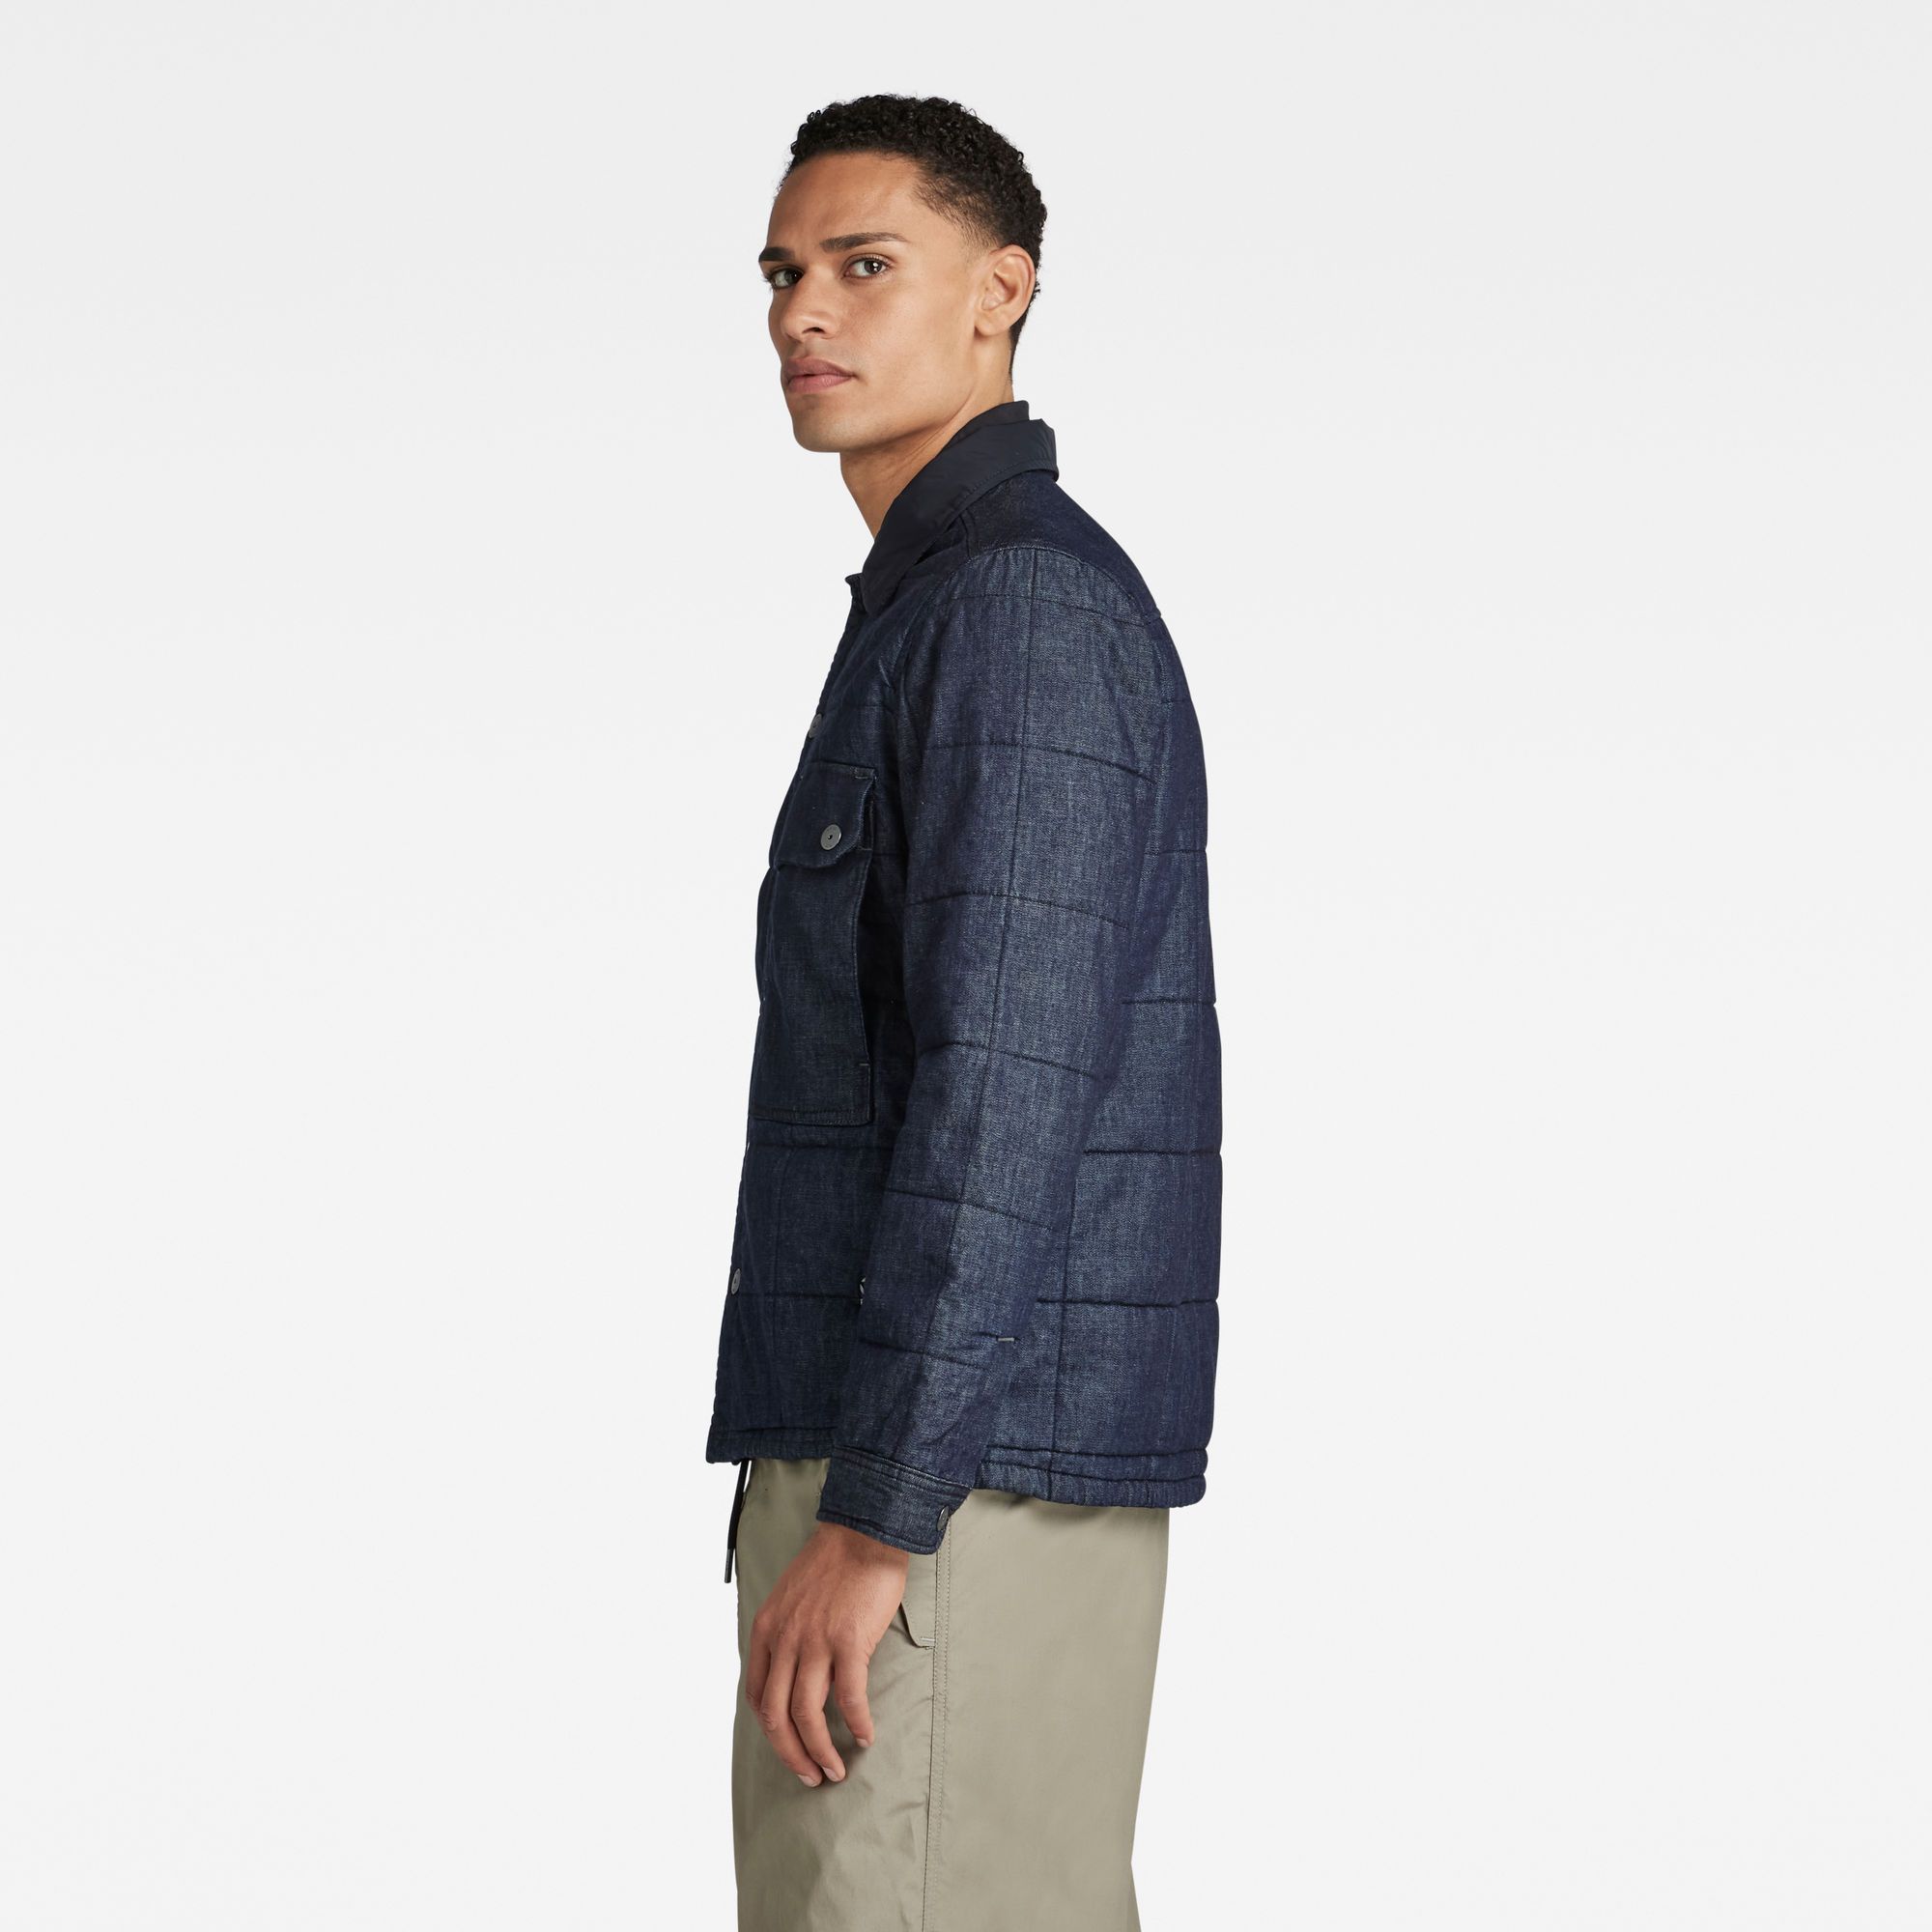 Flat collar- inner rib collar. Long sleeves, cuffed- snap button closure. Chest pocket with flap and snap button closure- side entry pocket underneath. Side seam pockets. Side slits. Snap button closure. Snap closure. A lightweight denim with a rich, uneven surface texture. Lightweight 7 oz denim. Straight